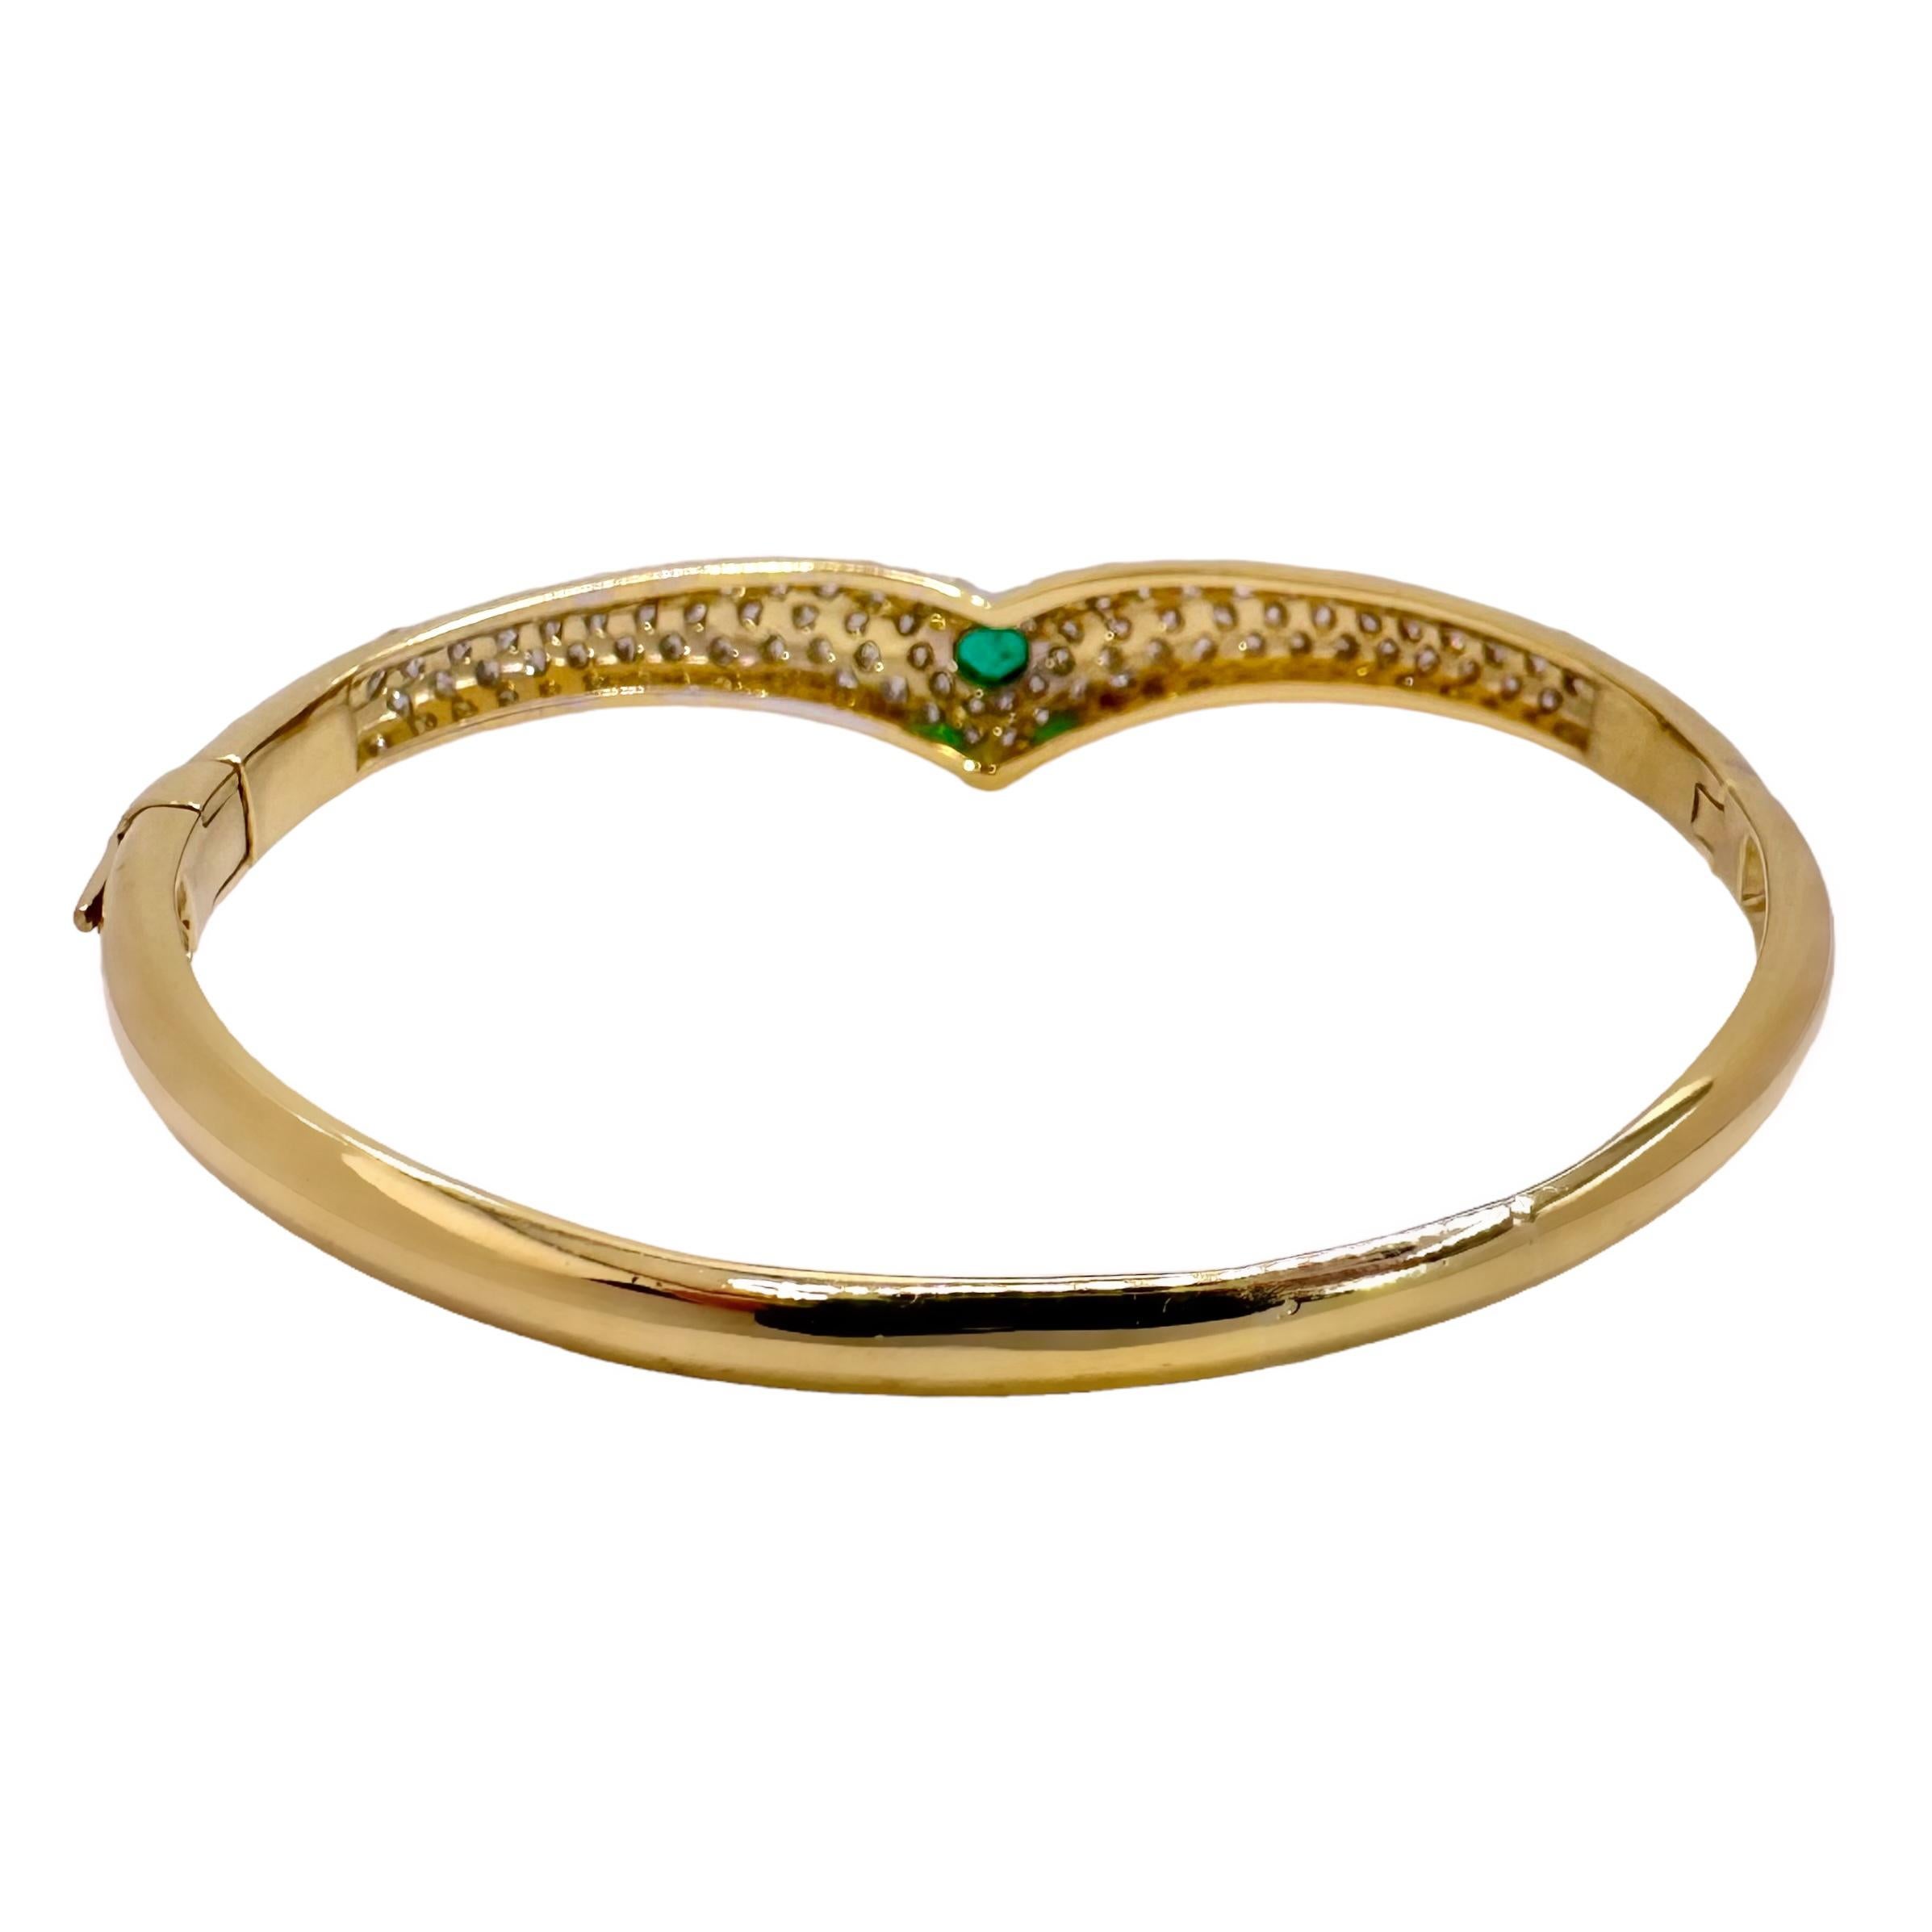  Stylish 18k Gold Bangle Bracelet with Heart Shaped Emerald and Diamonds In Good Condition For Sale In Palm Beach, FL